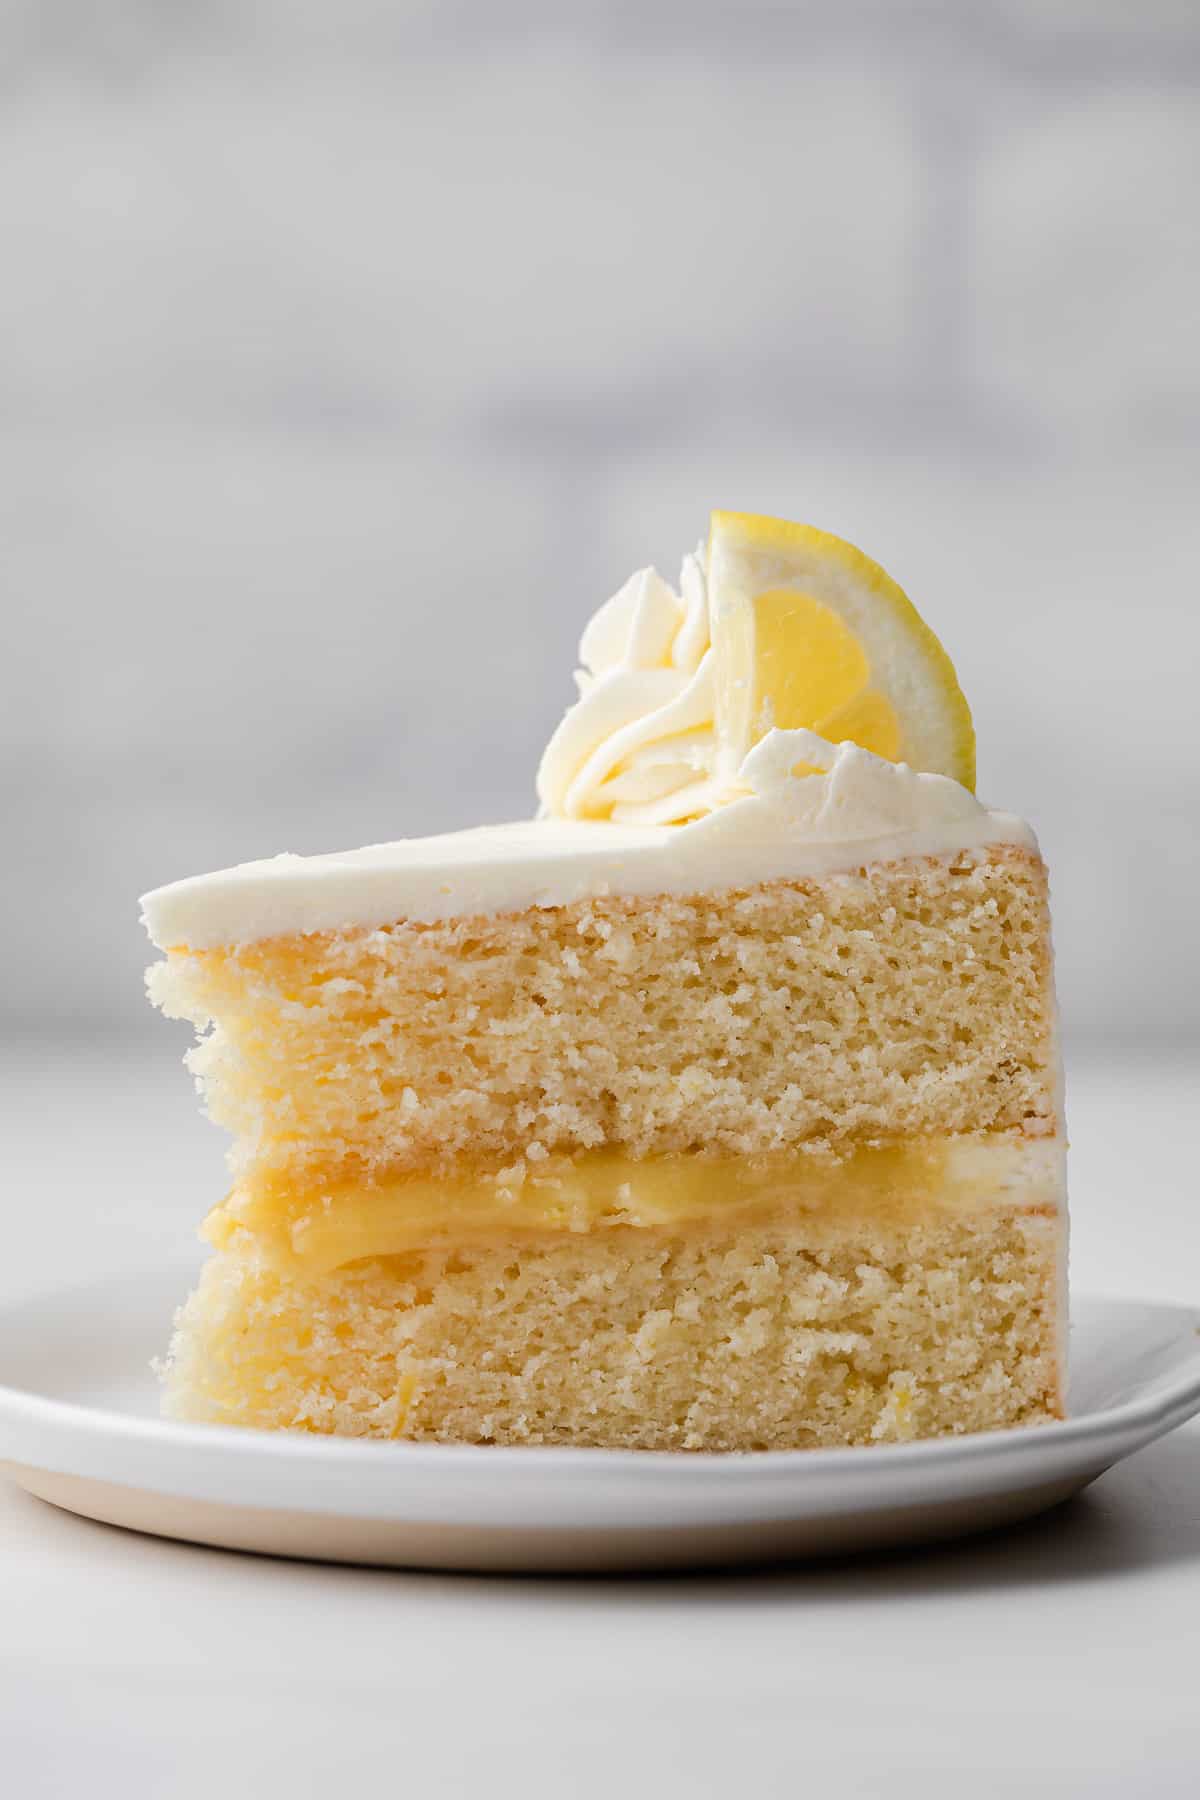 slice of lemon cake filled with lemon curd and topped with lemon buttercream on a white plate